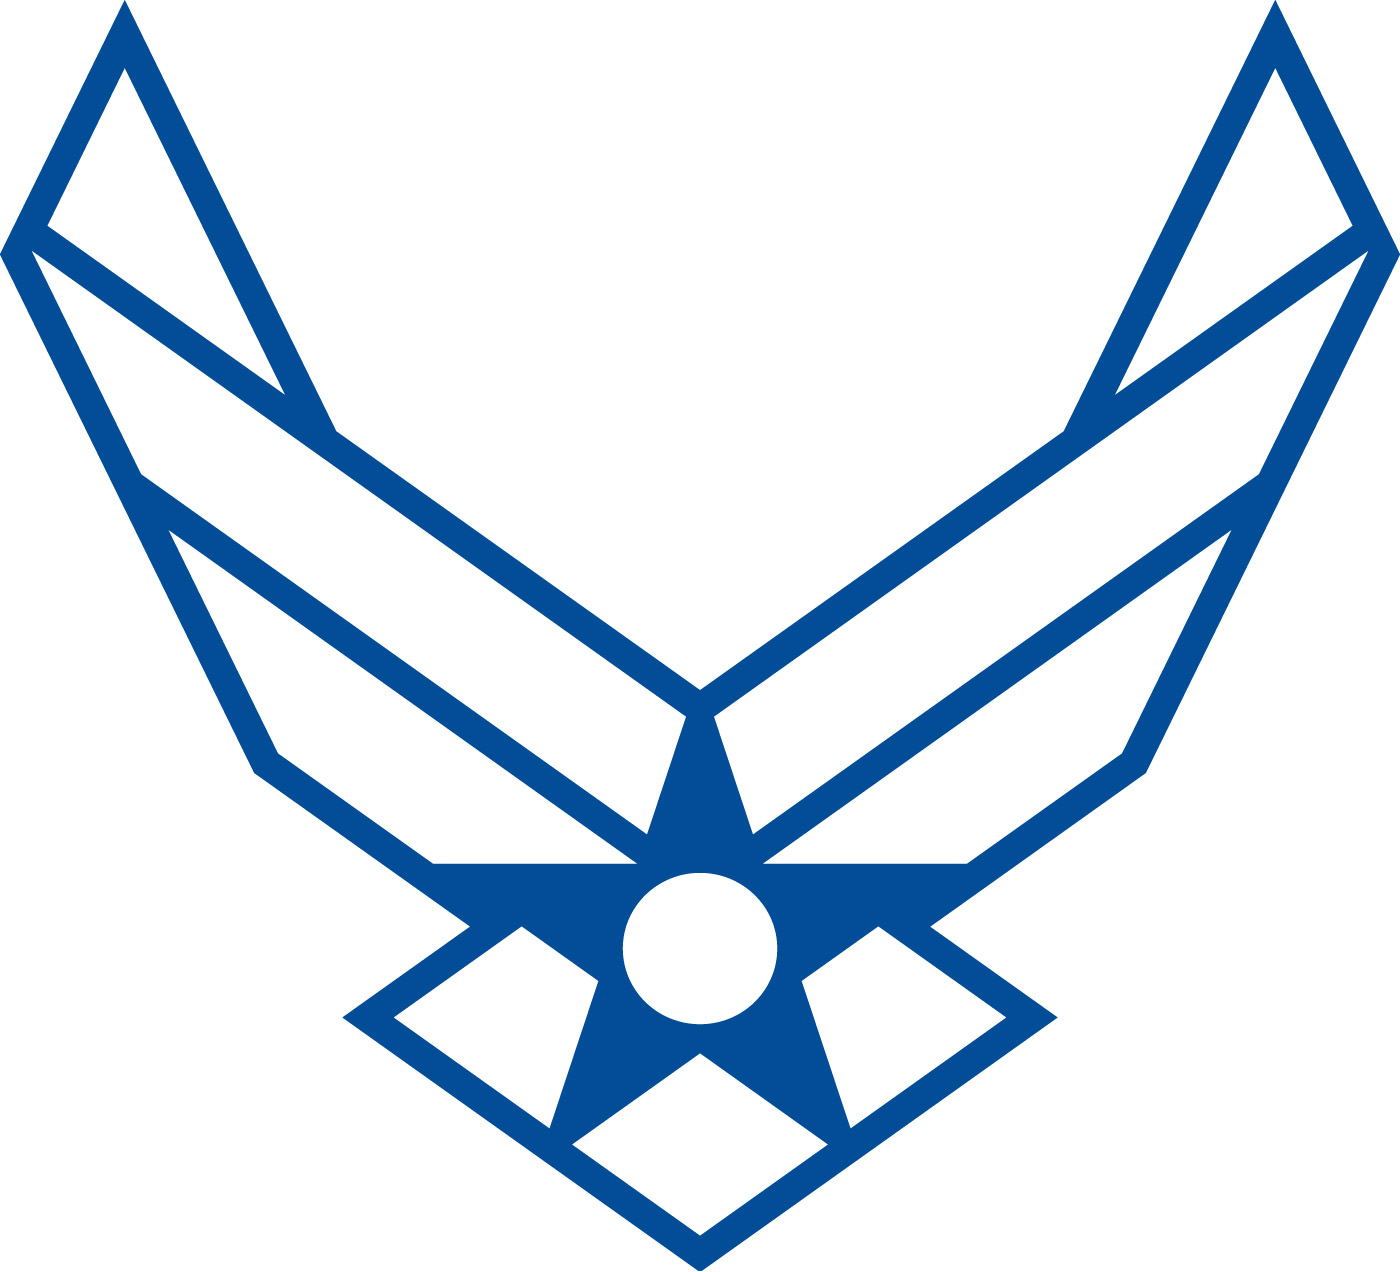 39 Air Force Logo Clip Art   Free Cliparts That You Can Download To